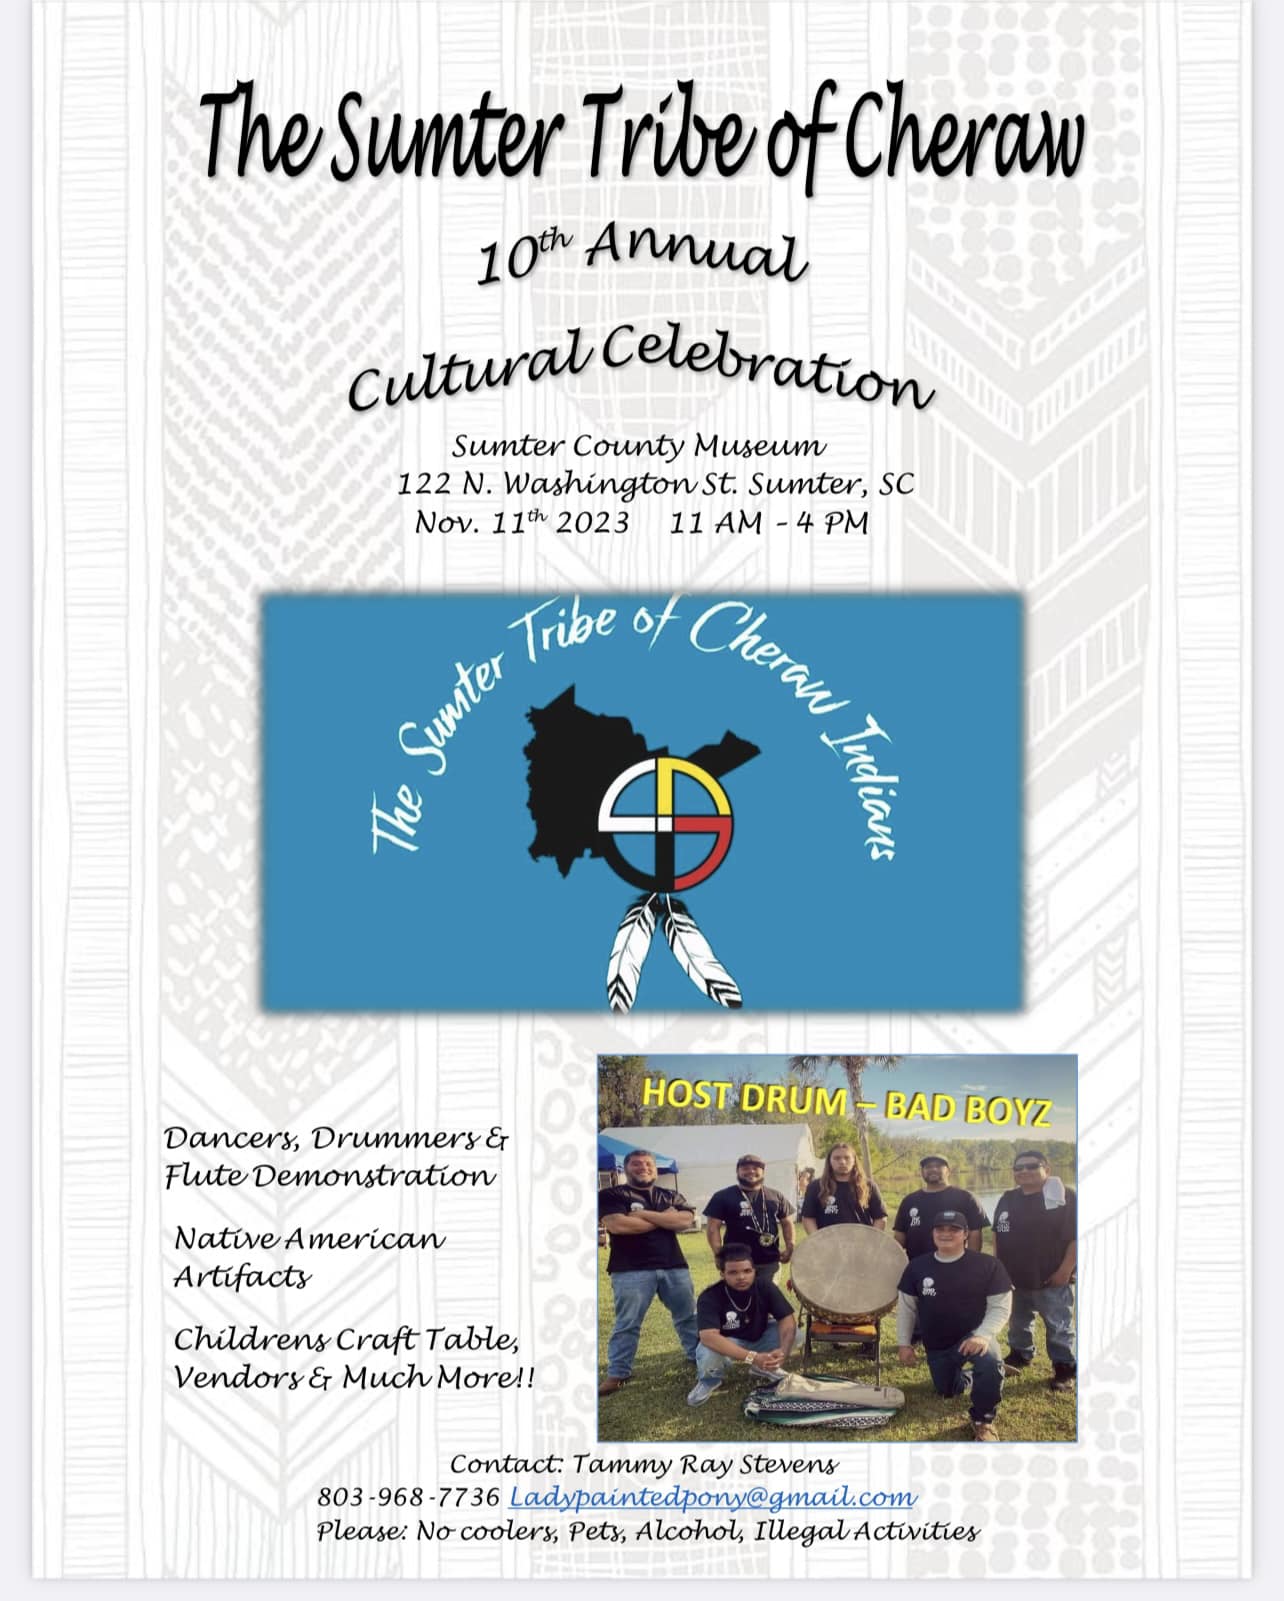 10th Annual Cultural Celebration with The Sumter Tribe of Cheraw 2023